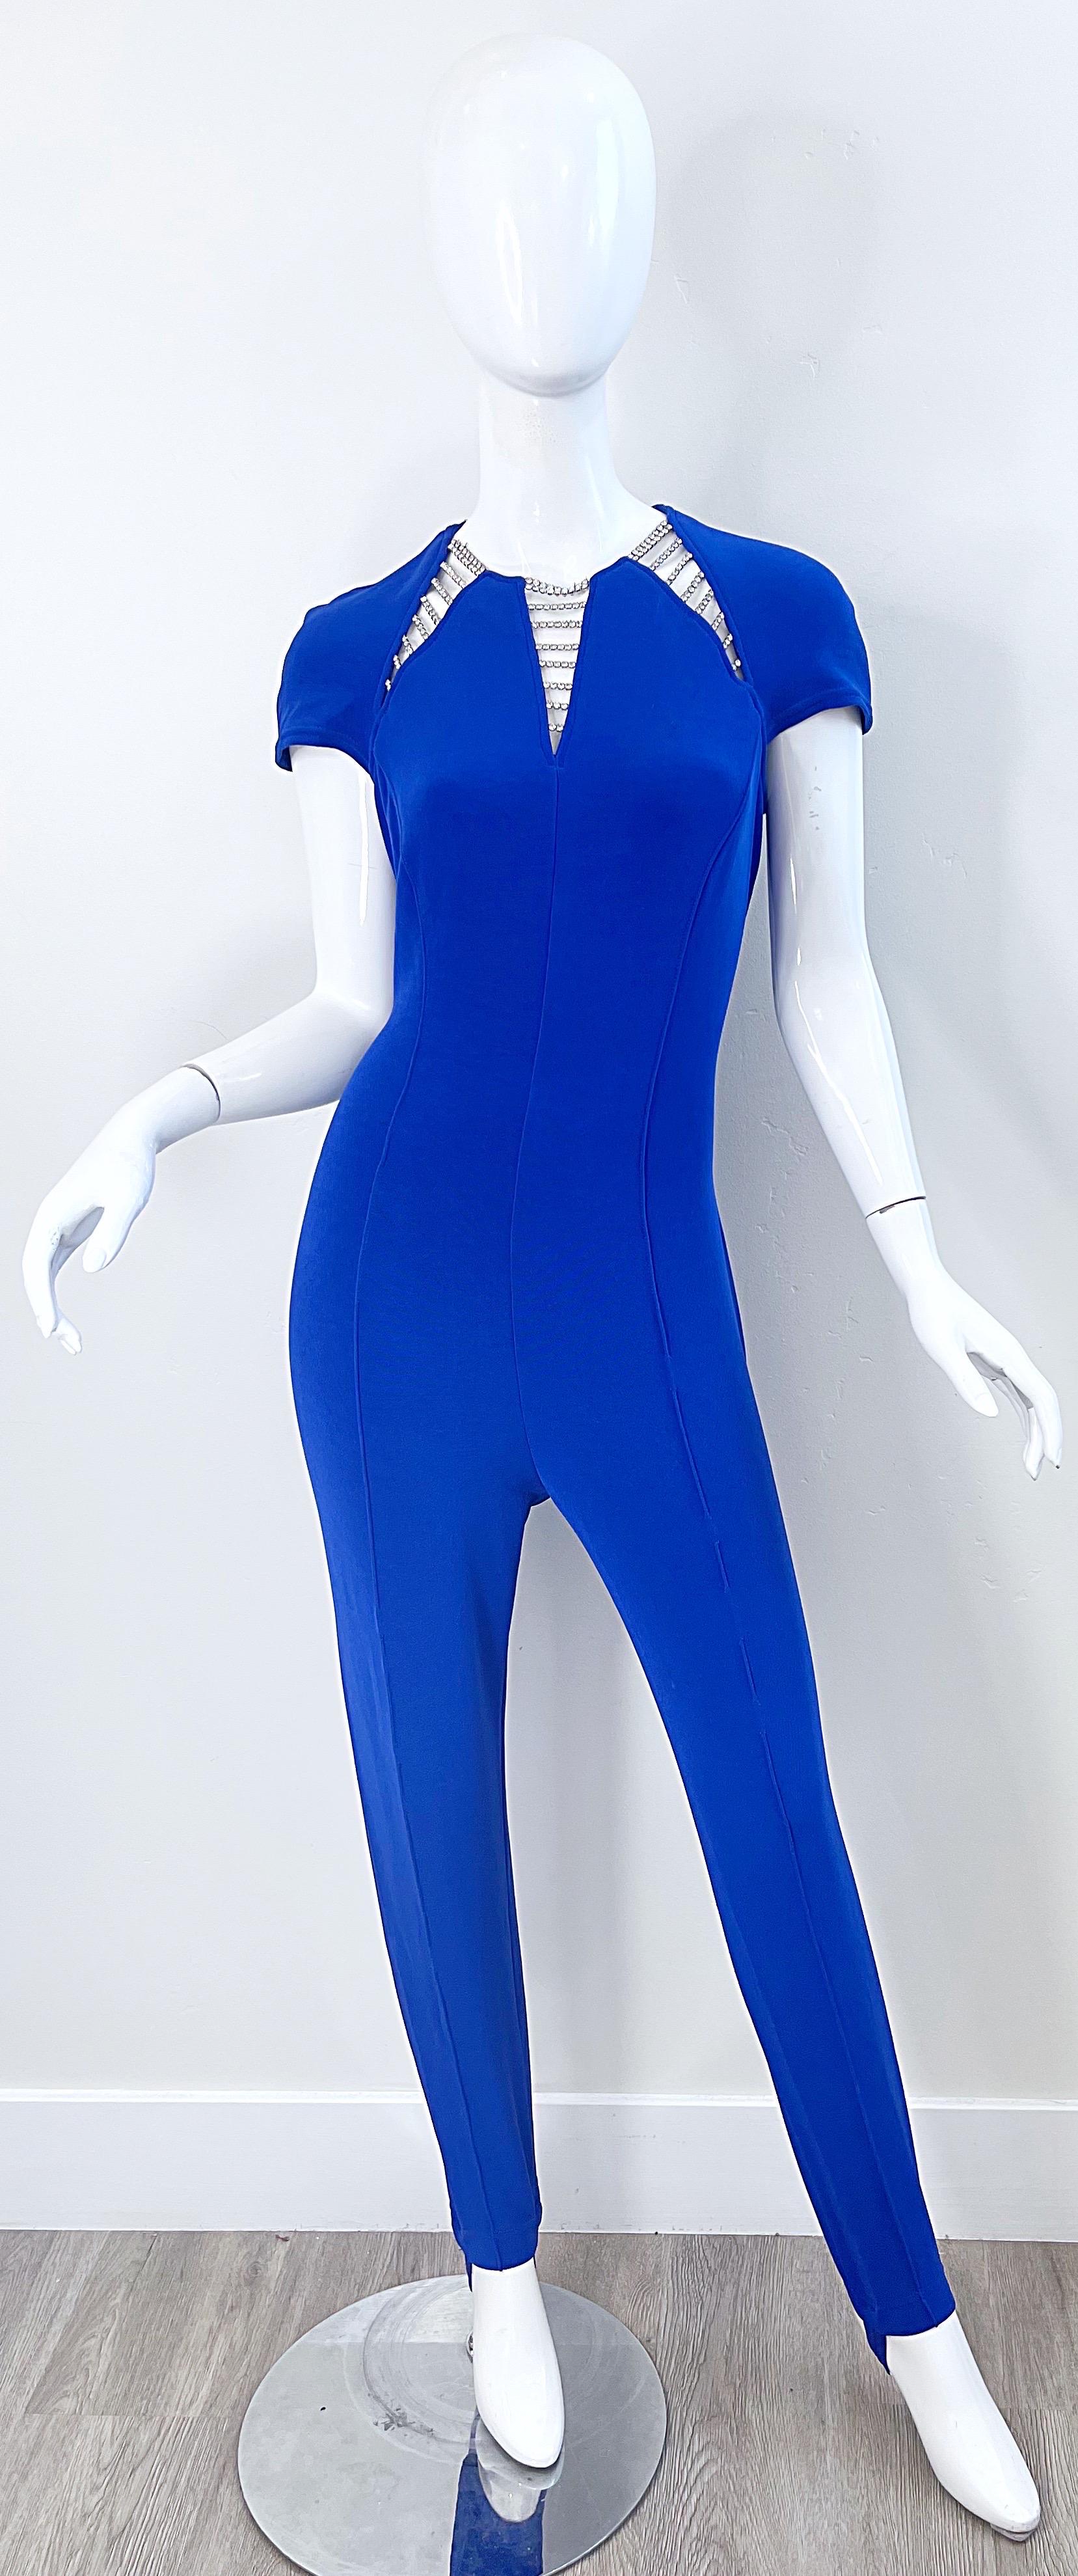 1980s Tadashi Royal Blue Rhinestone Cut Out Stirrup Pant Vintage 80s Jumpsuit In Excellent Condition For Sale In San Diego, CA